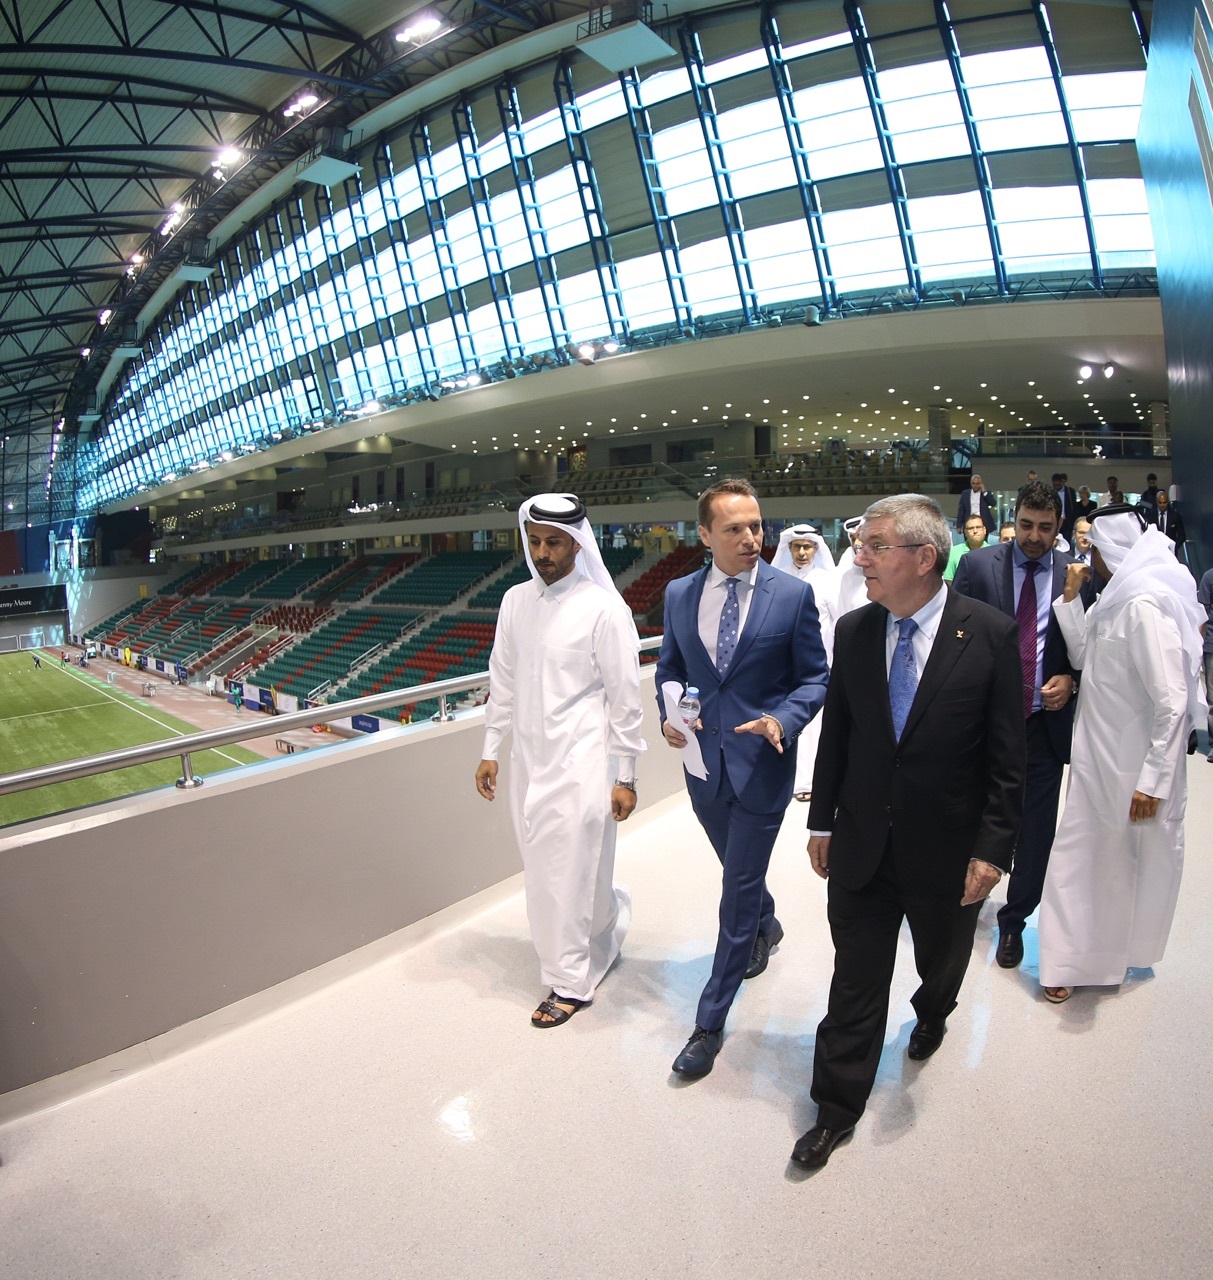 The International Olympic Committee (IOC) President Thomas Bach visits Aspire Academy